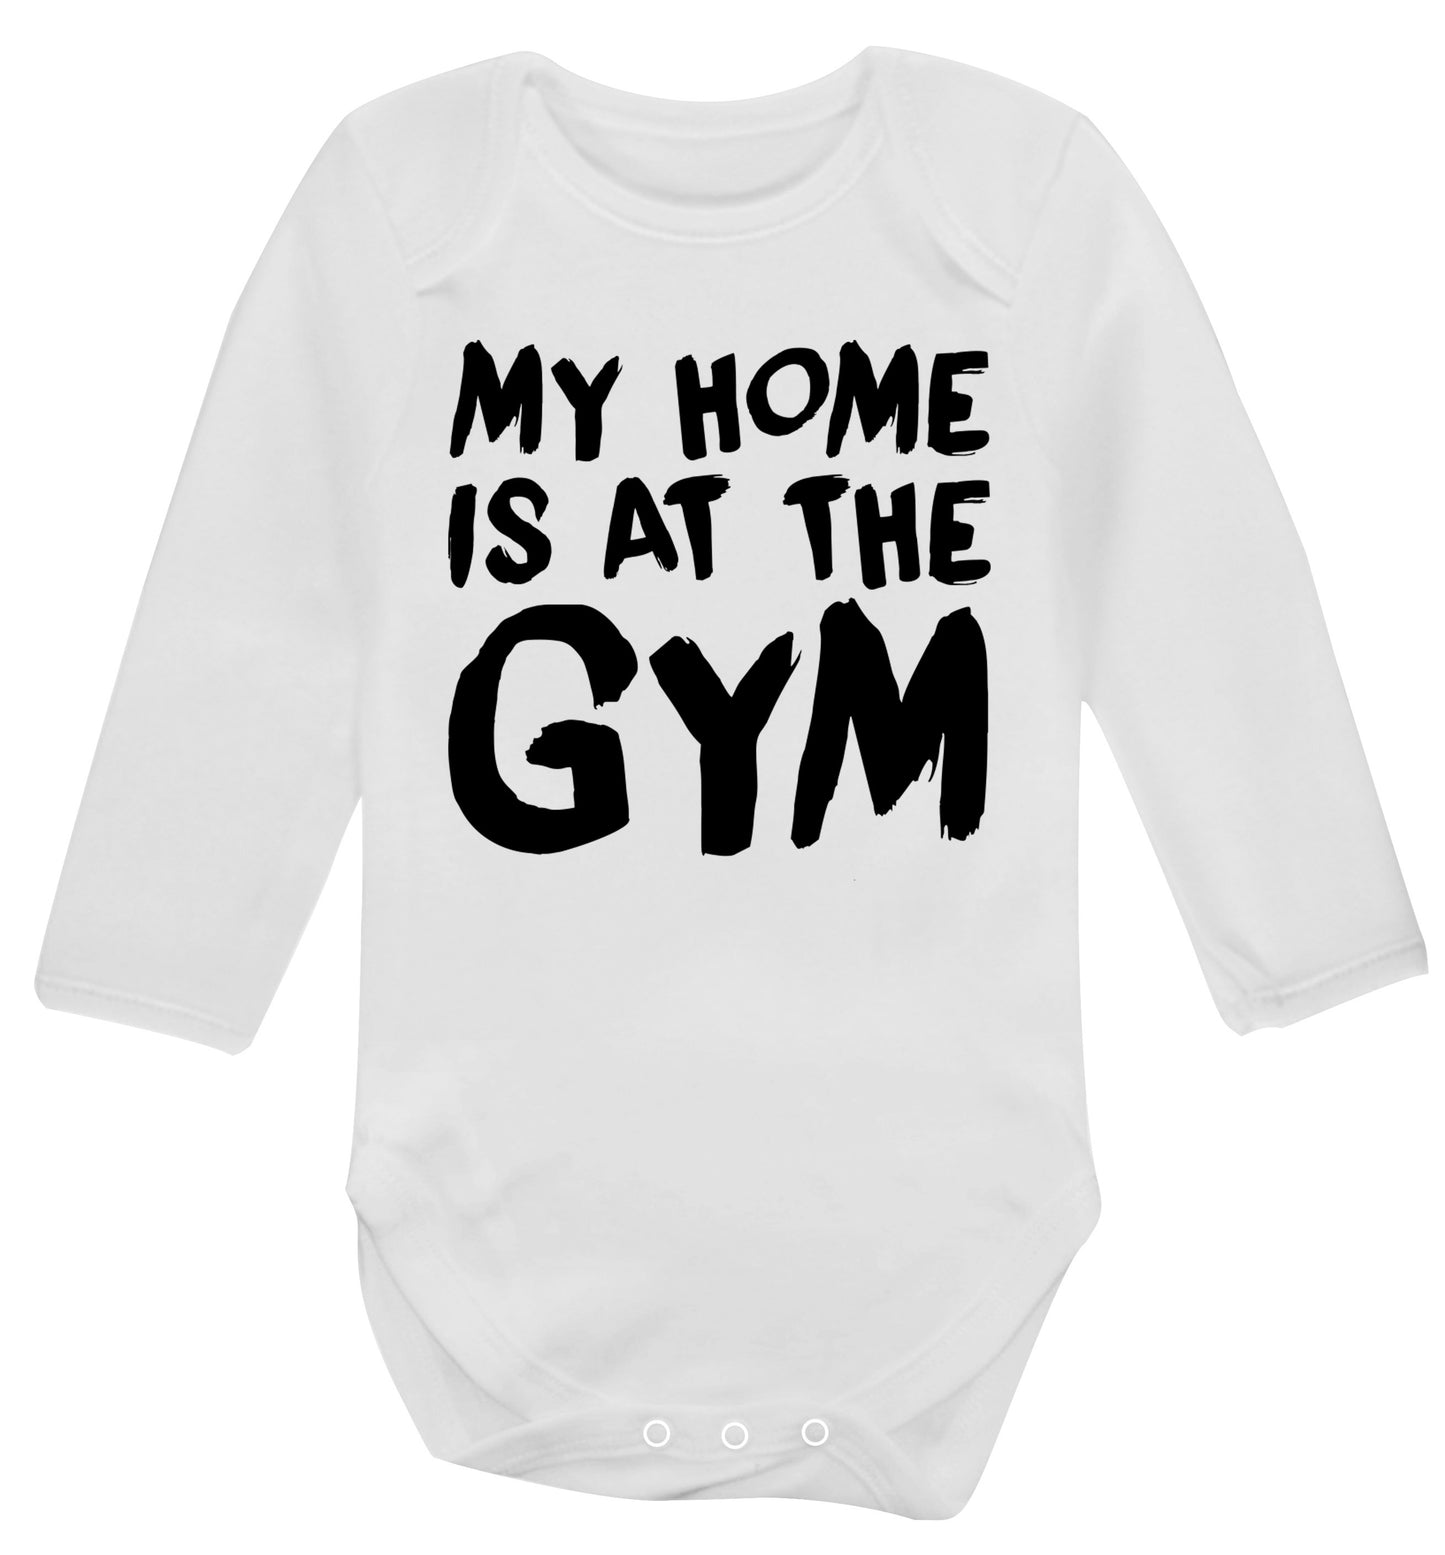 My home is at the gym Baby Vest long sleeved white 6-12 months